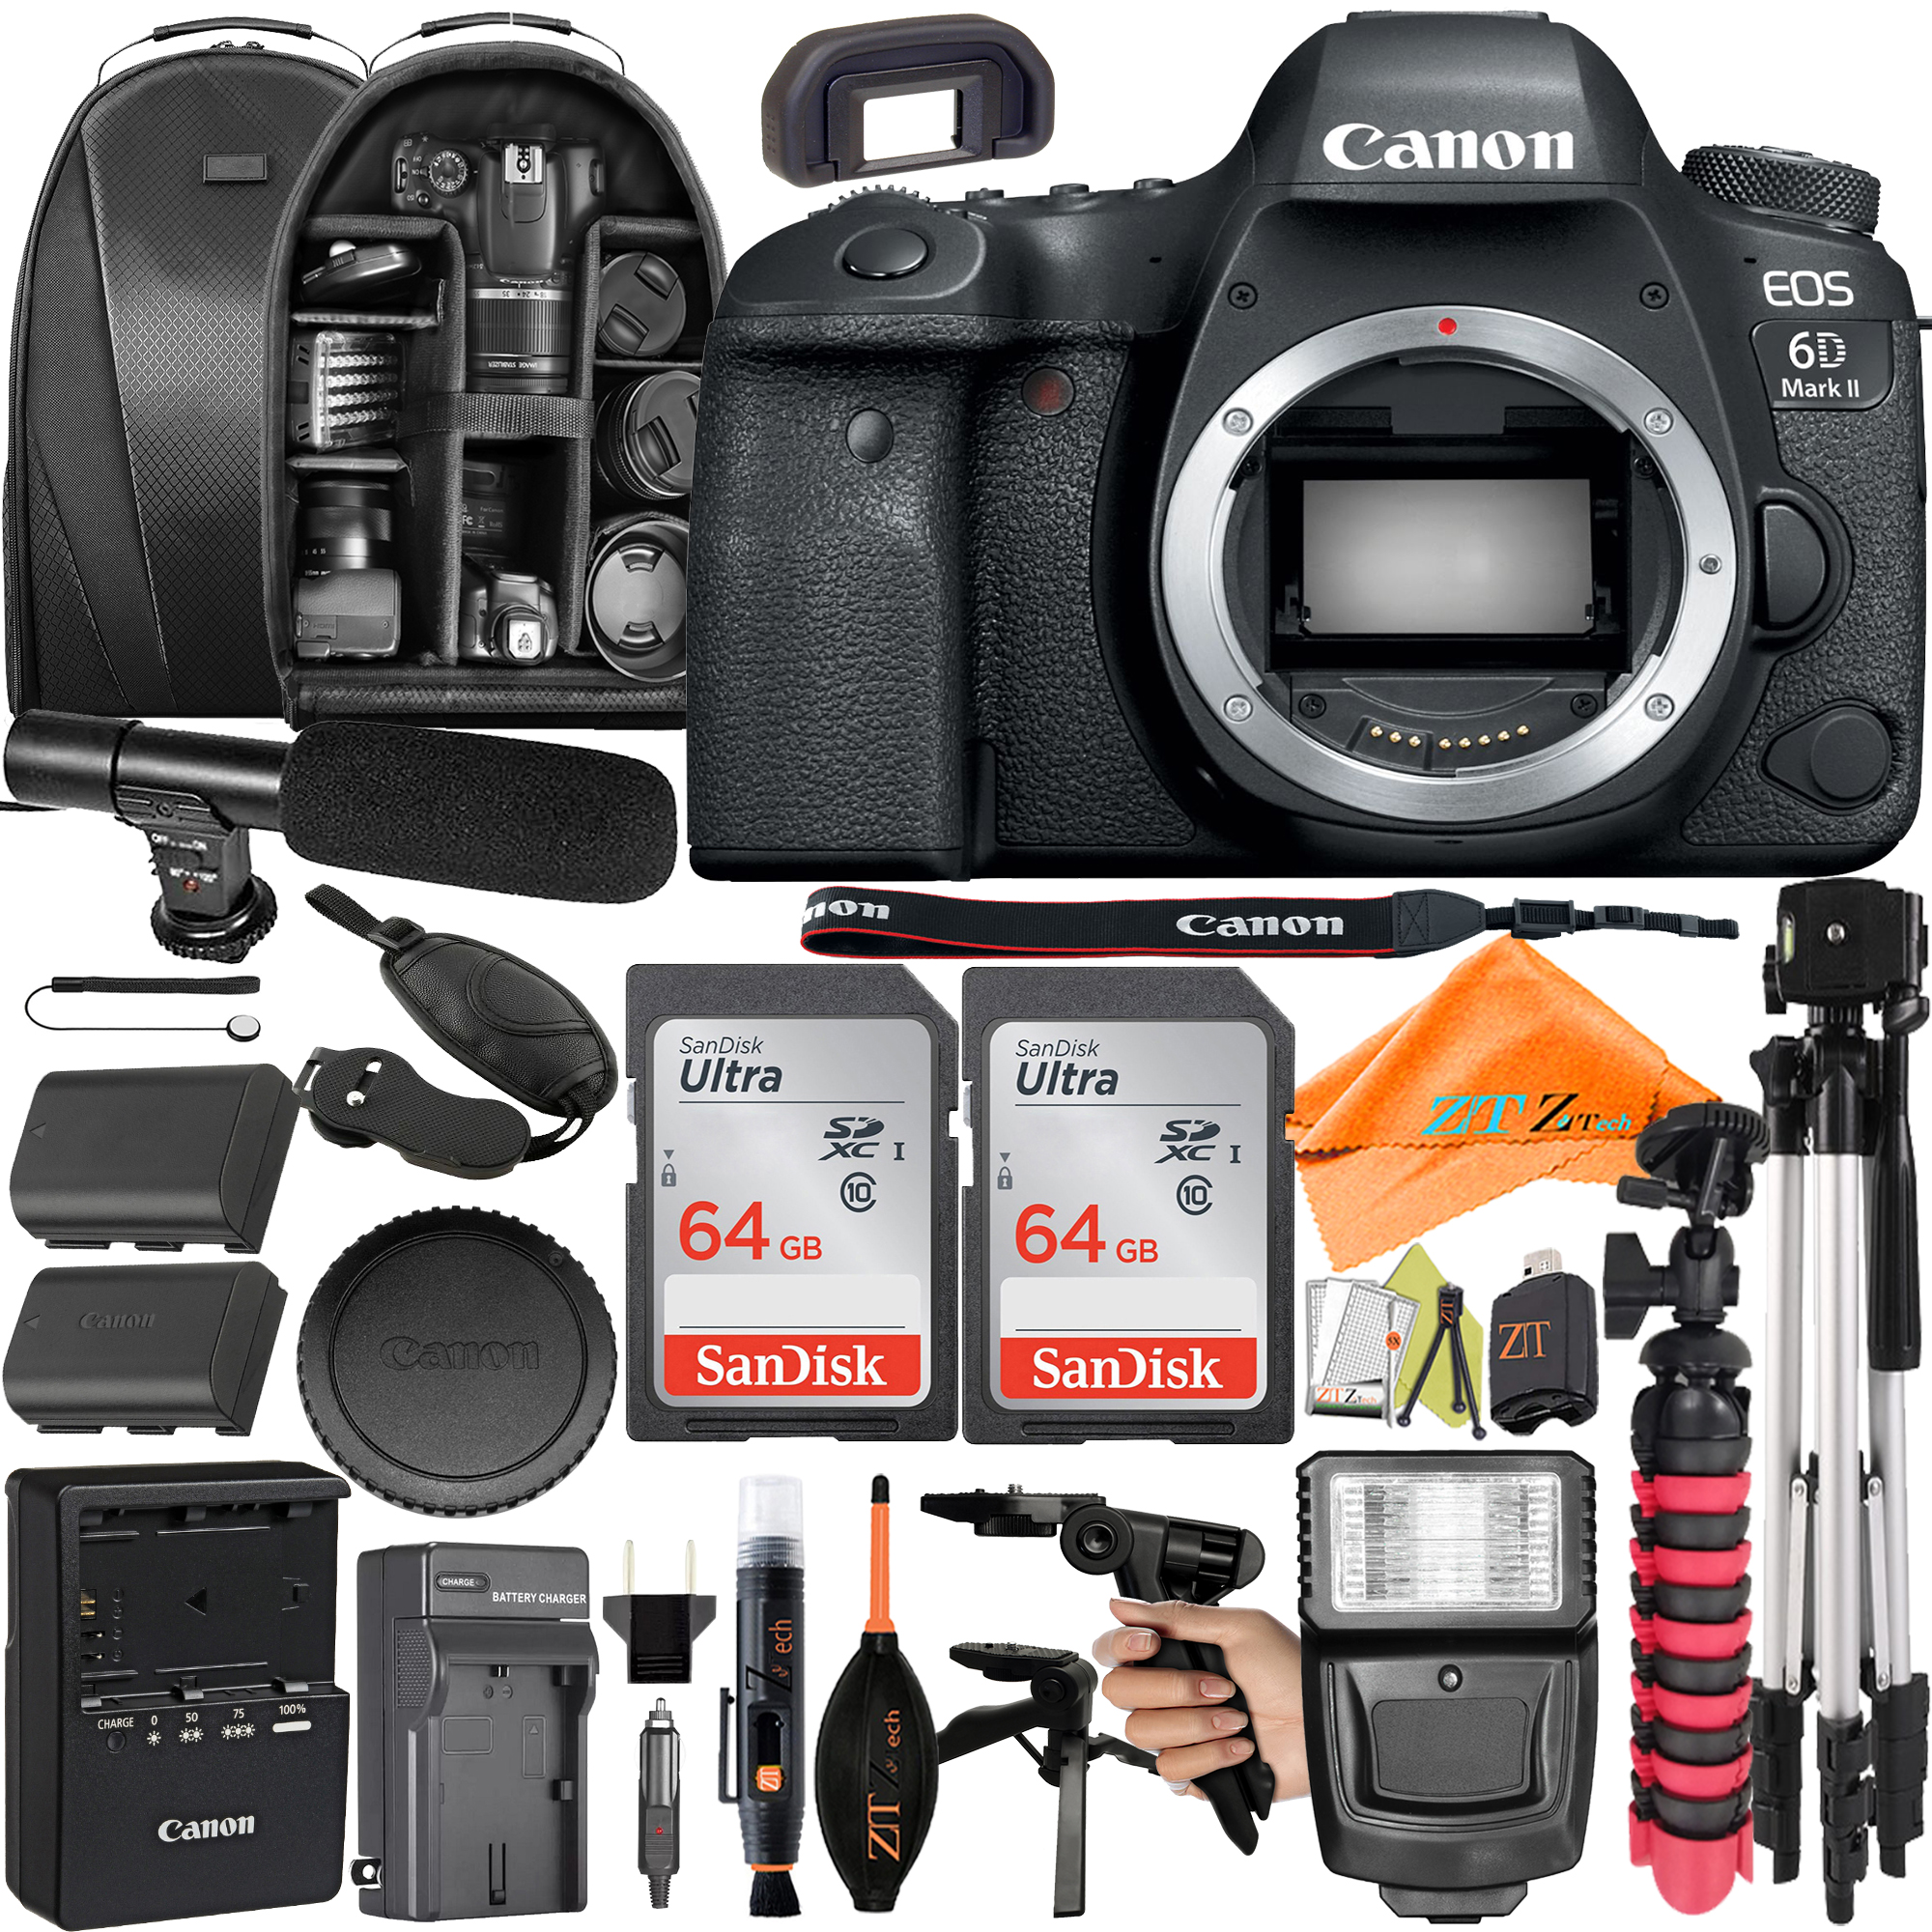 Canon EOS 6D Mark II DSLR Camera (Body Only) with SanDisk 64GB + Backpack Case + Microphone + ZeeTech Accessory Bundle